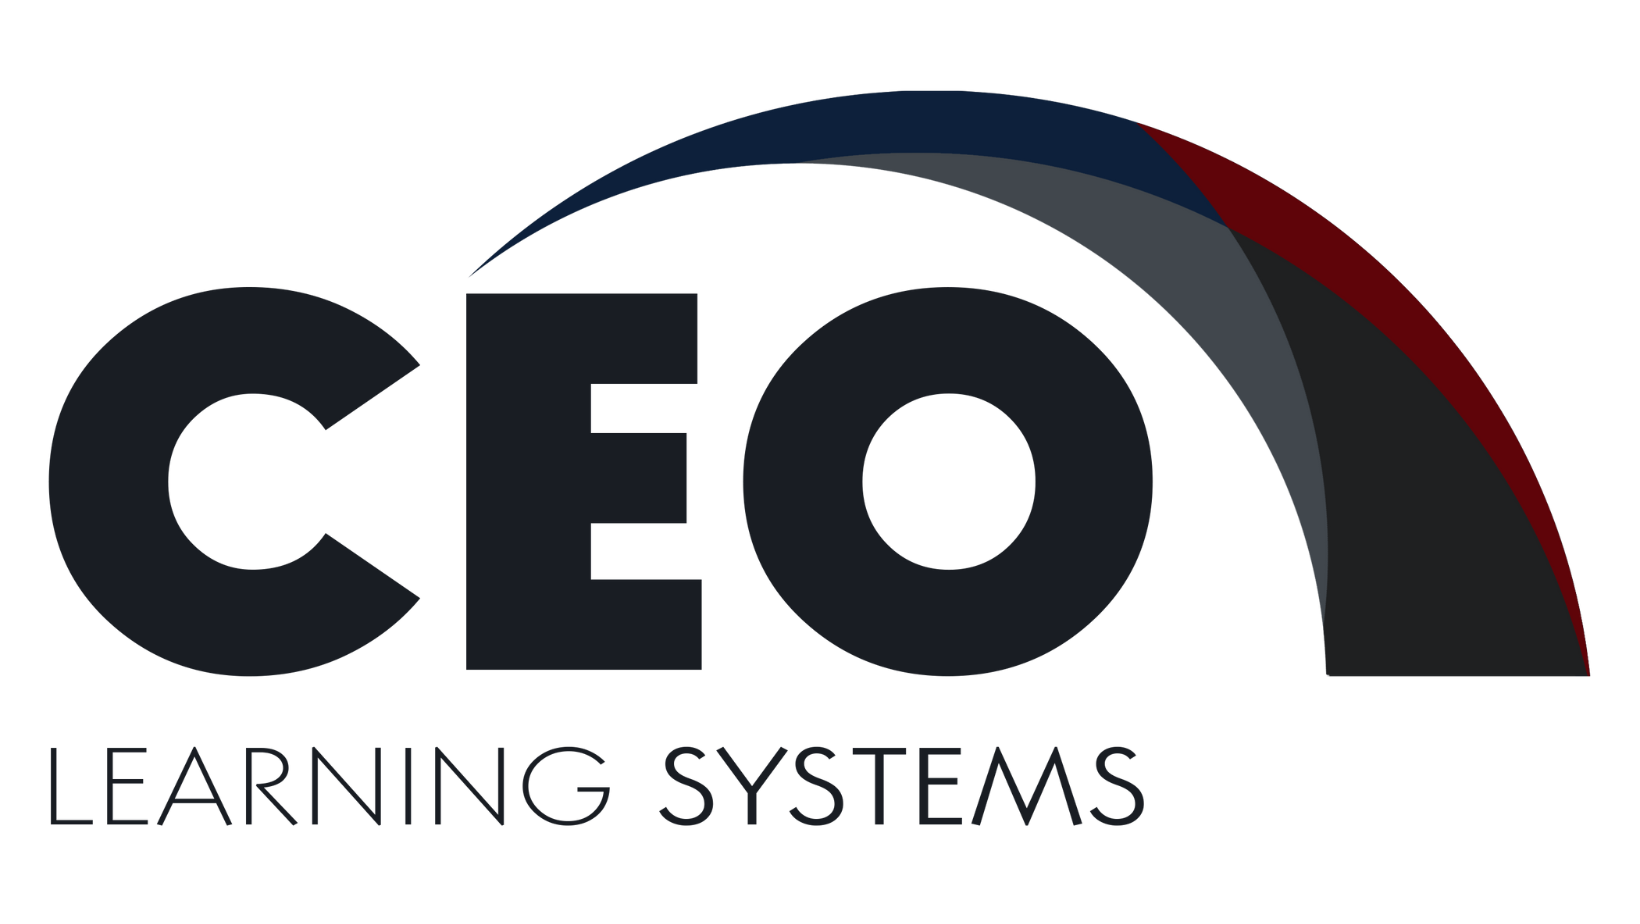 CEO Learning Systems